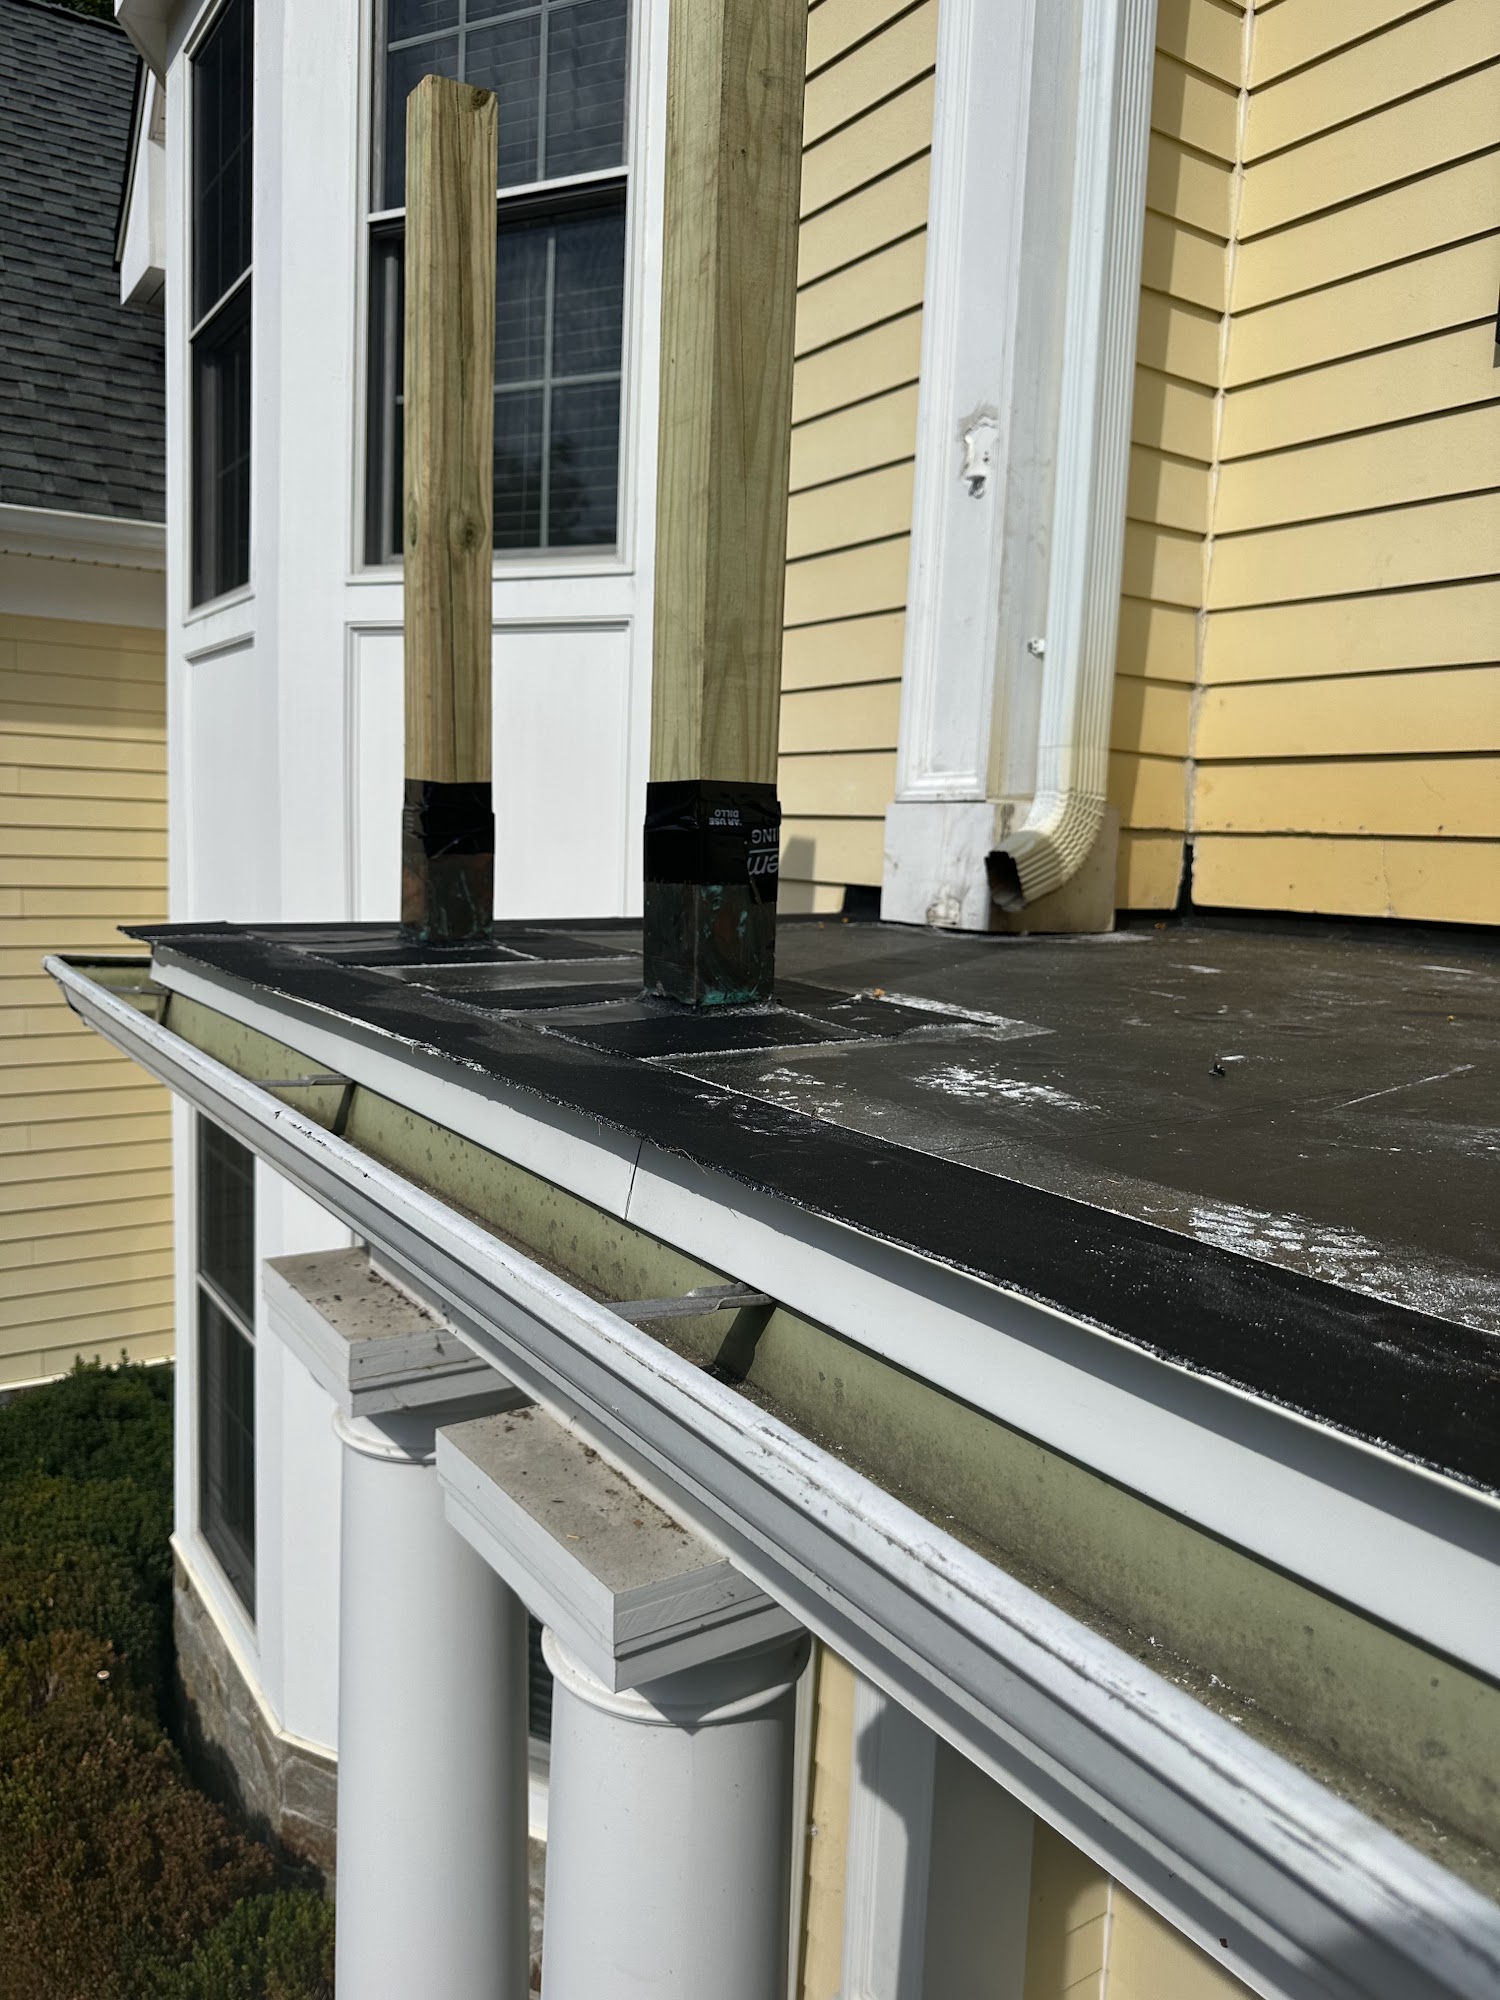 George's Seamless Gutters 76 S Central Ave, Elmsford New York 10523